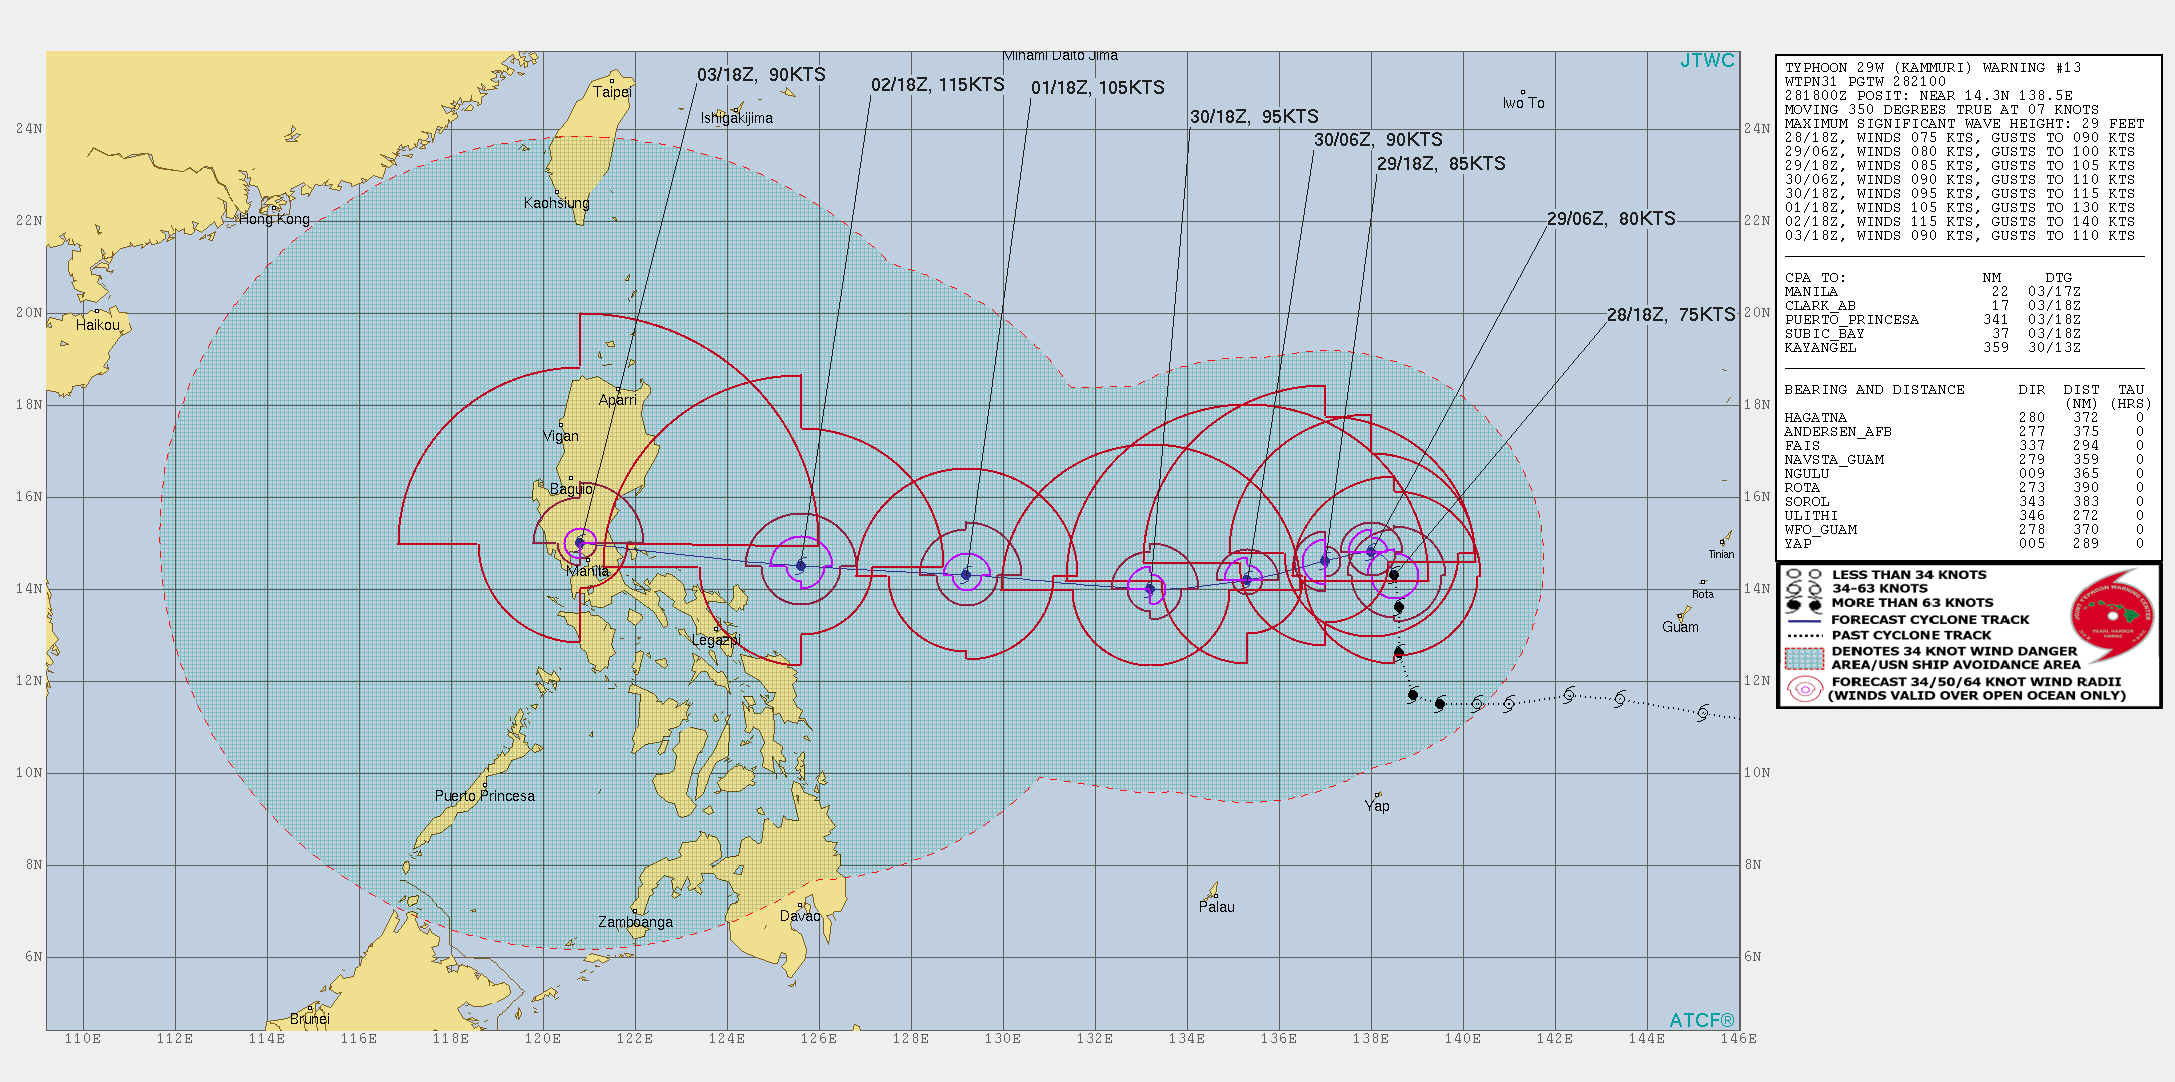 FORECAST TO GRADUALLY INTENSITY TO CATEGORY 4 IN 4 DAYS